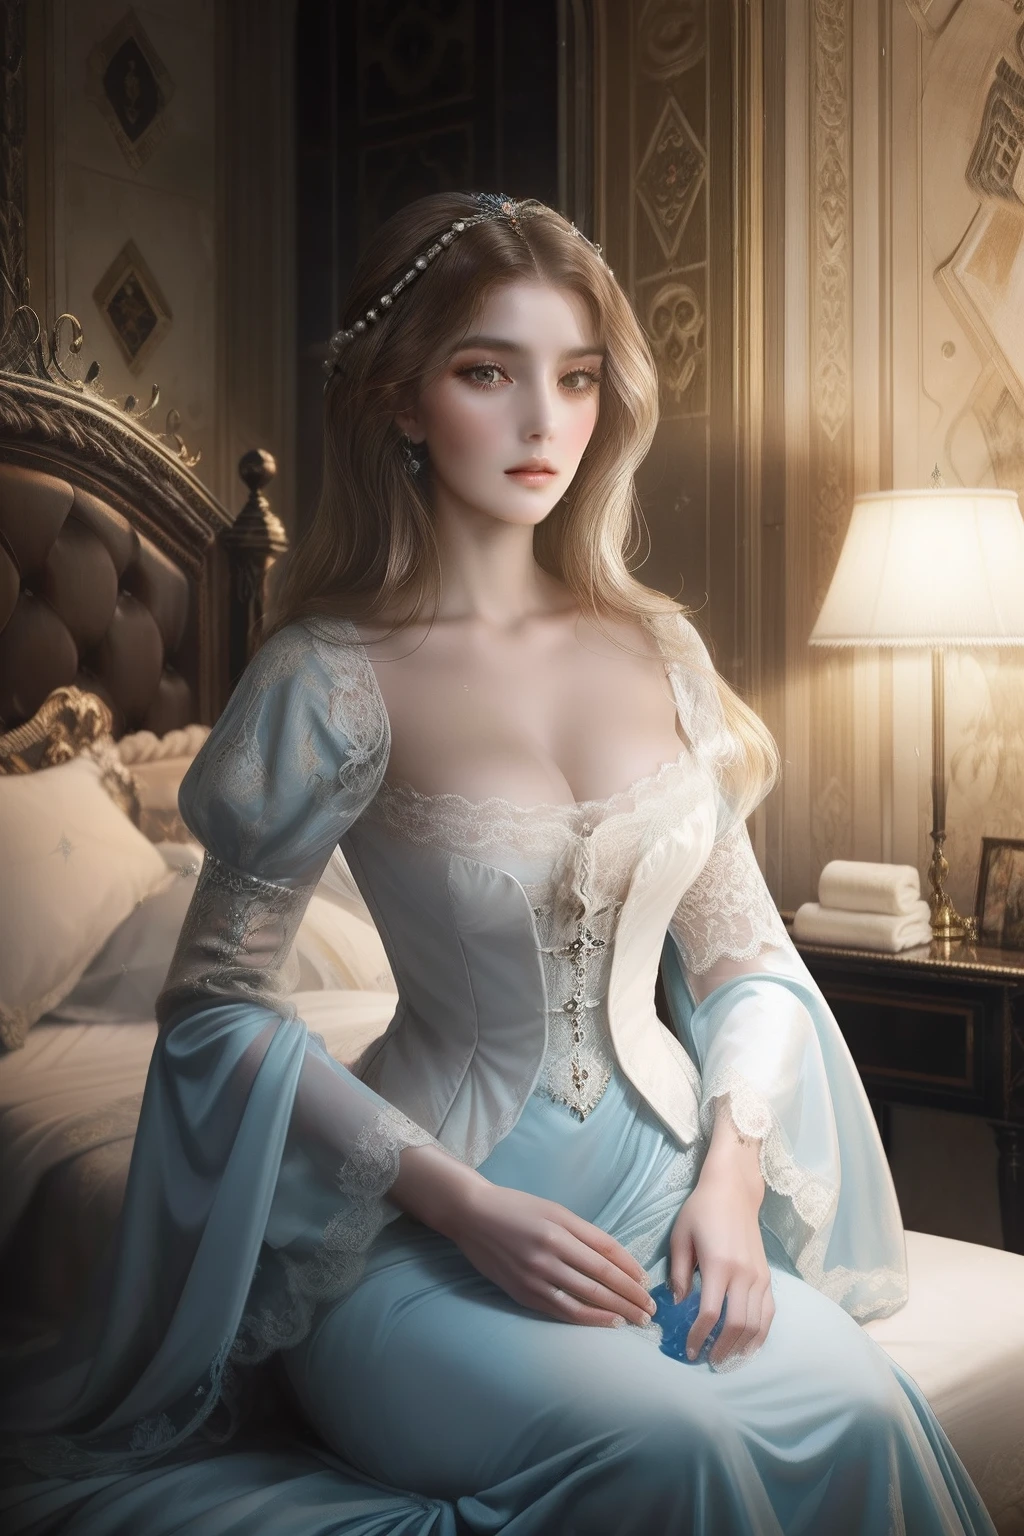 Beautiful French noblewoman of the middle ages, long black hair, alluring blue eyes, voluptuous body, Maximum sensuality, wearing night robes in a luxurious bedroom, Clean yourself with wet wipes